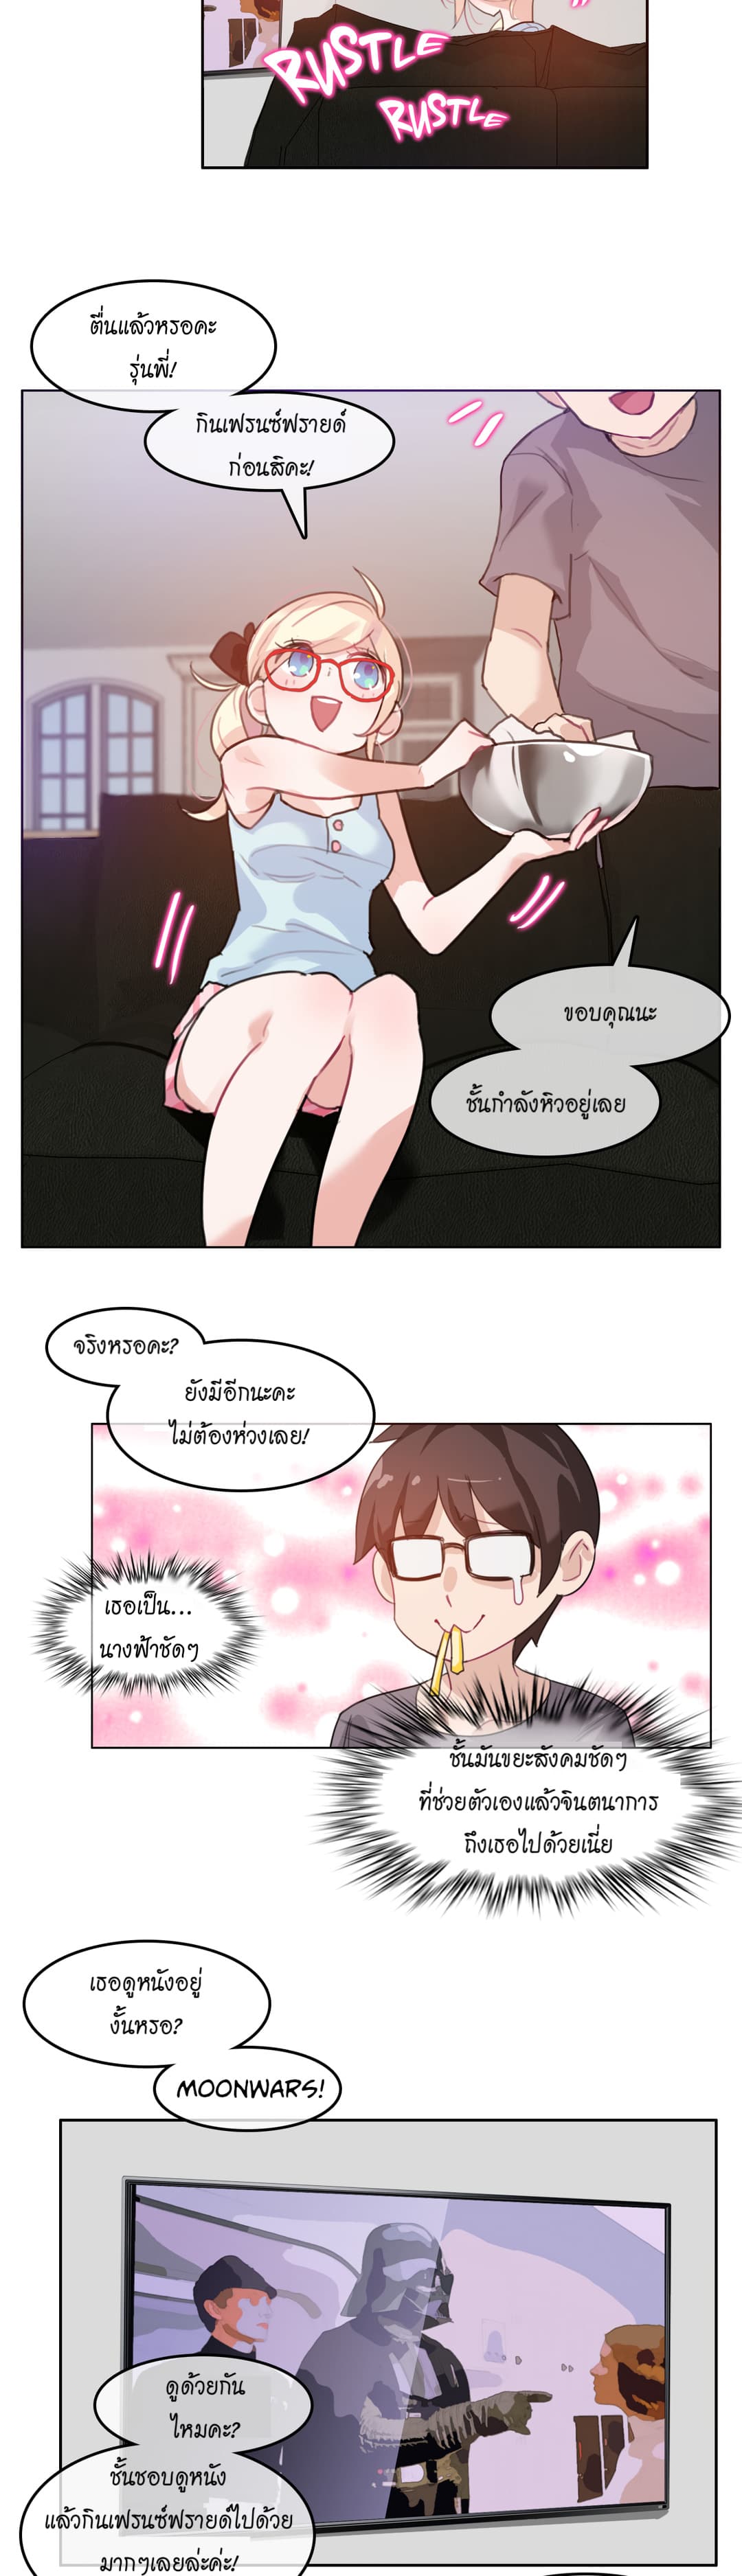 A Pervert’s Daily Life 4 (14)